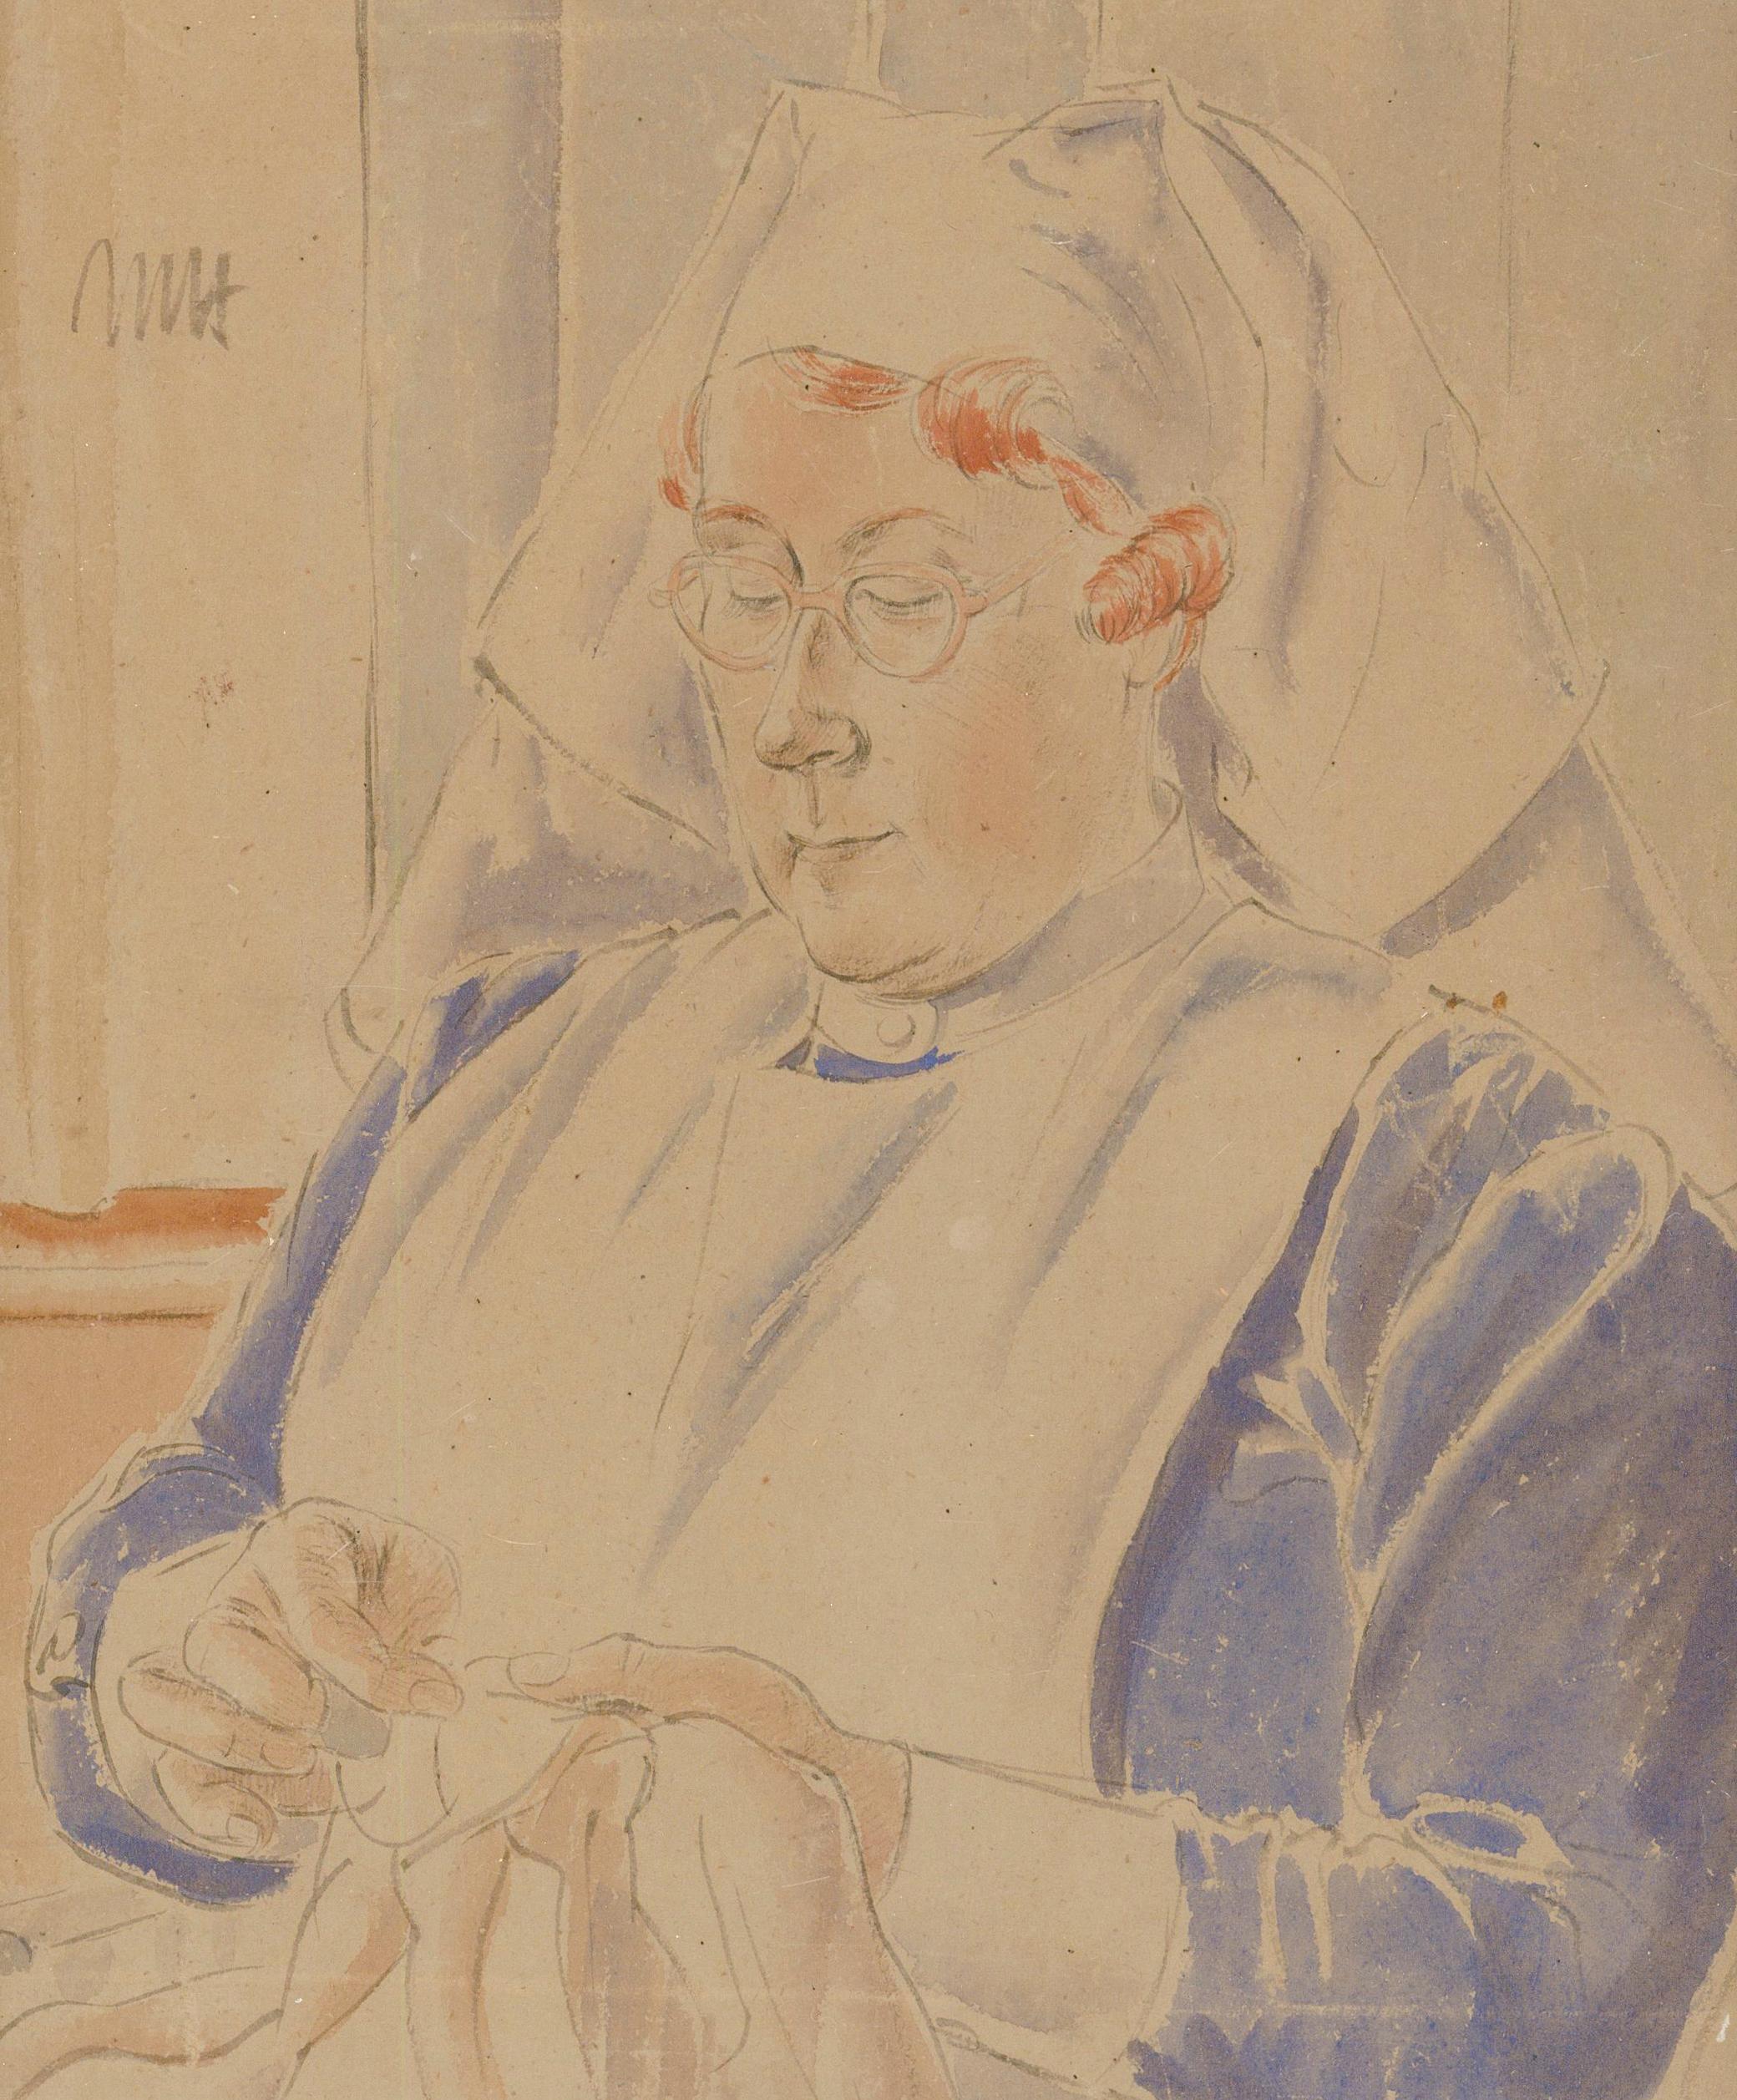 A fine portrait in watercolour depicting a nurse wearing a traditional nurse's cap, sewing a piece of cloth. Handsomely presented in an antique oak frame. Monogrammed to the upper left corner. On paper. 